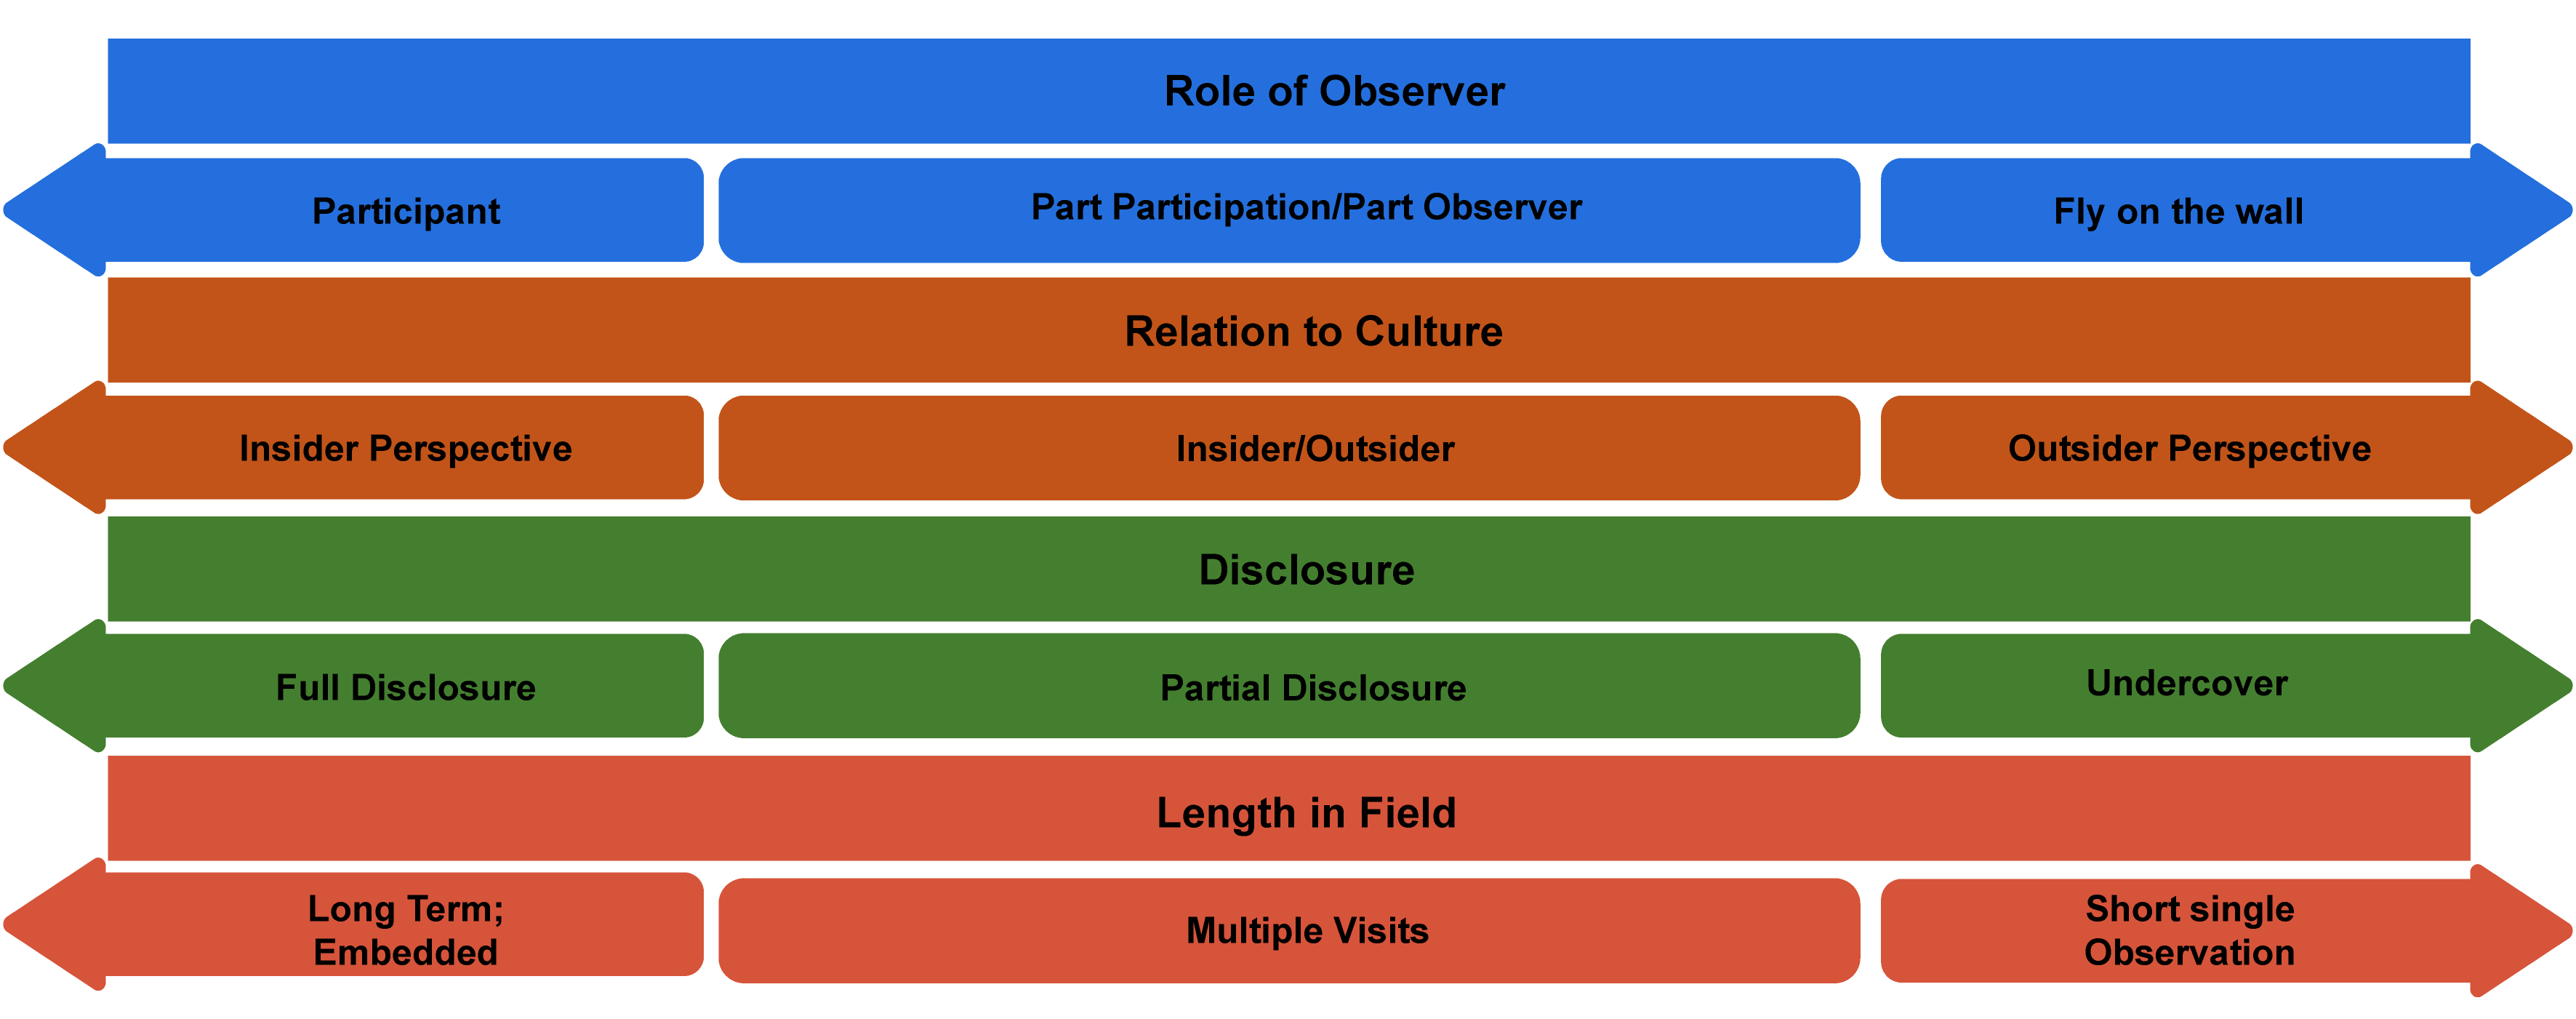 qualitative research on participant observation